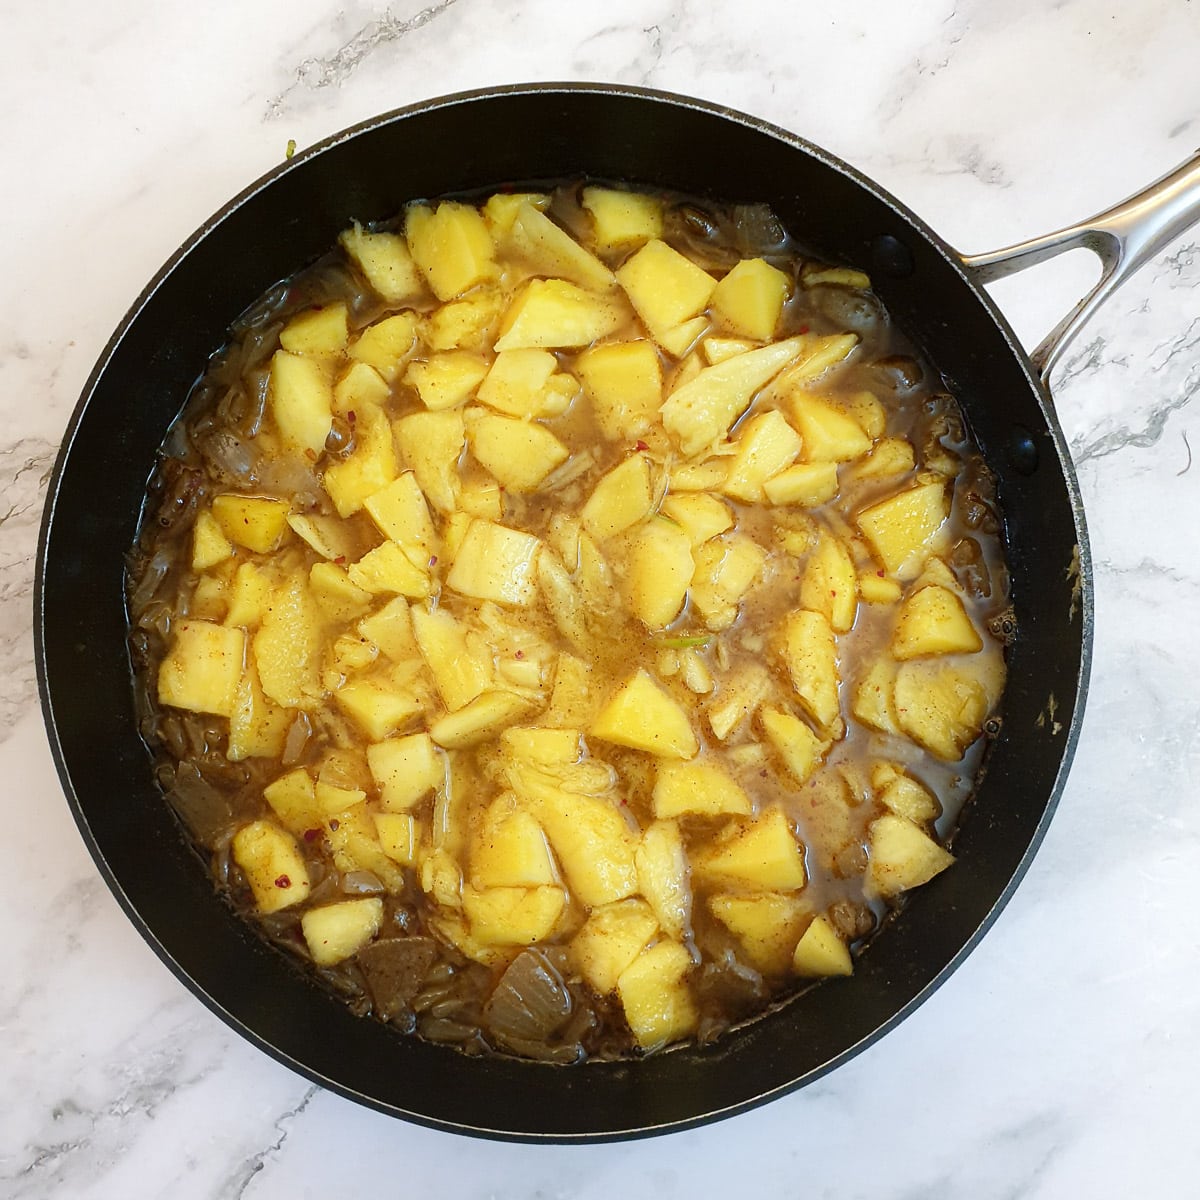 Chopped mango, vinegar and sugar added to the spicy onions in a frying pan.